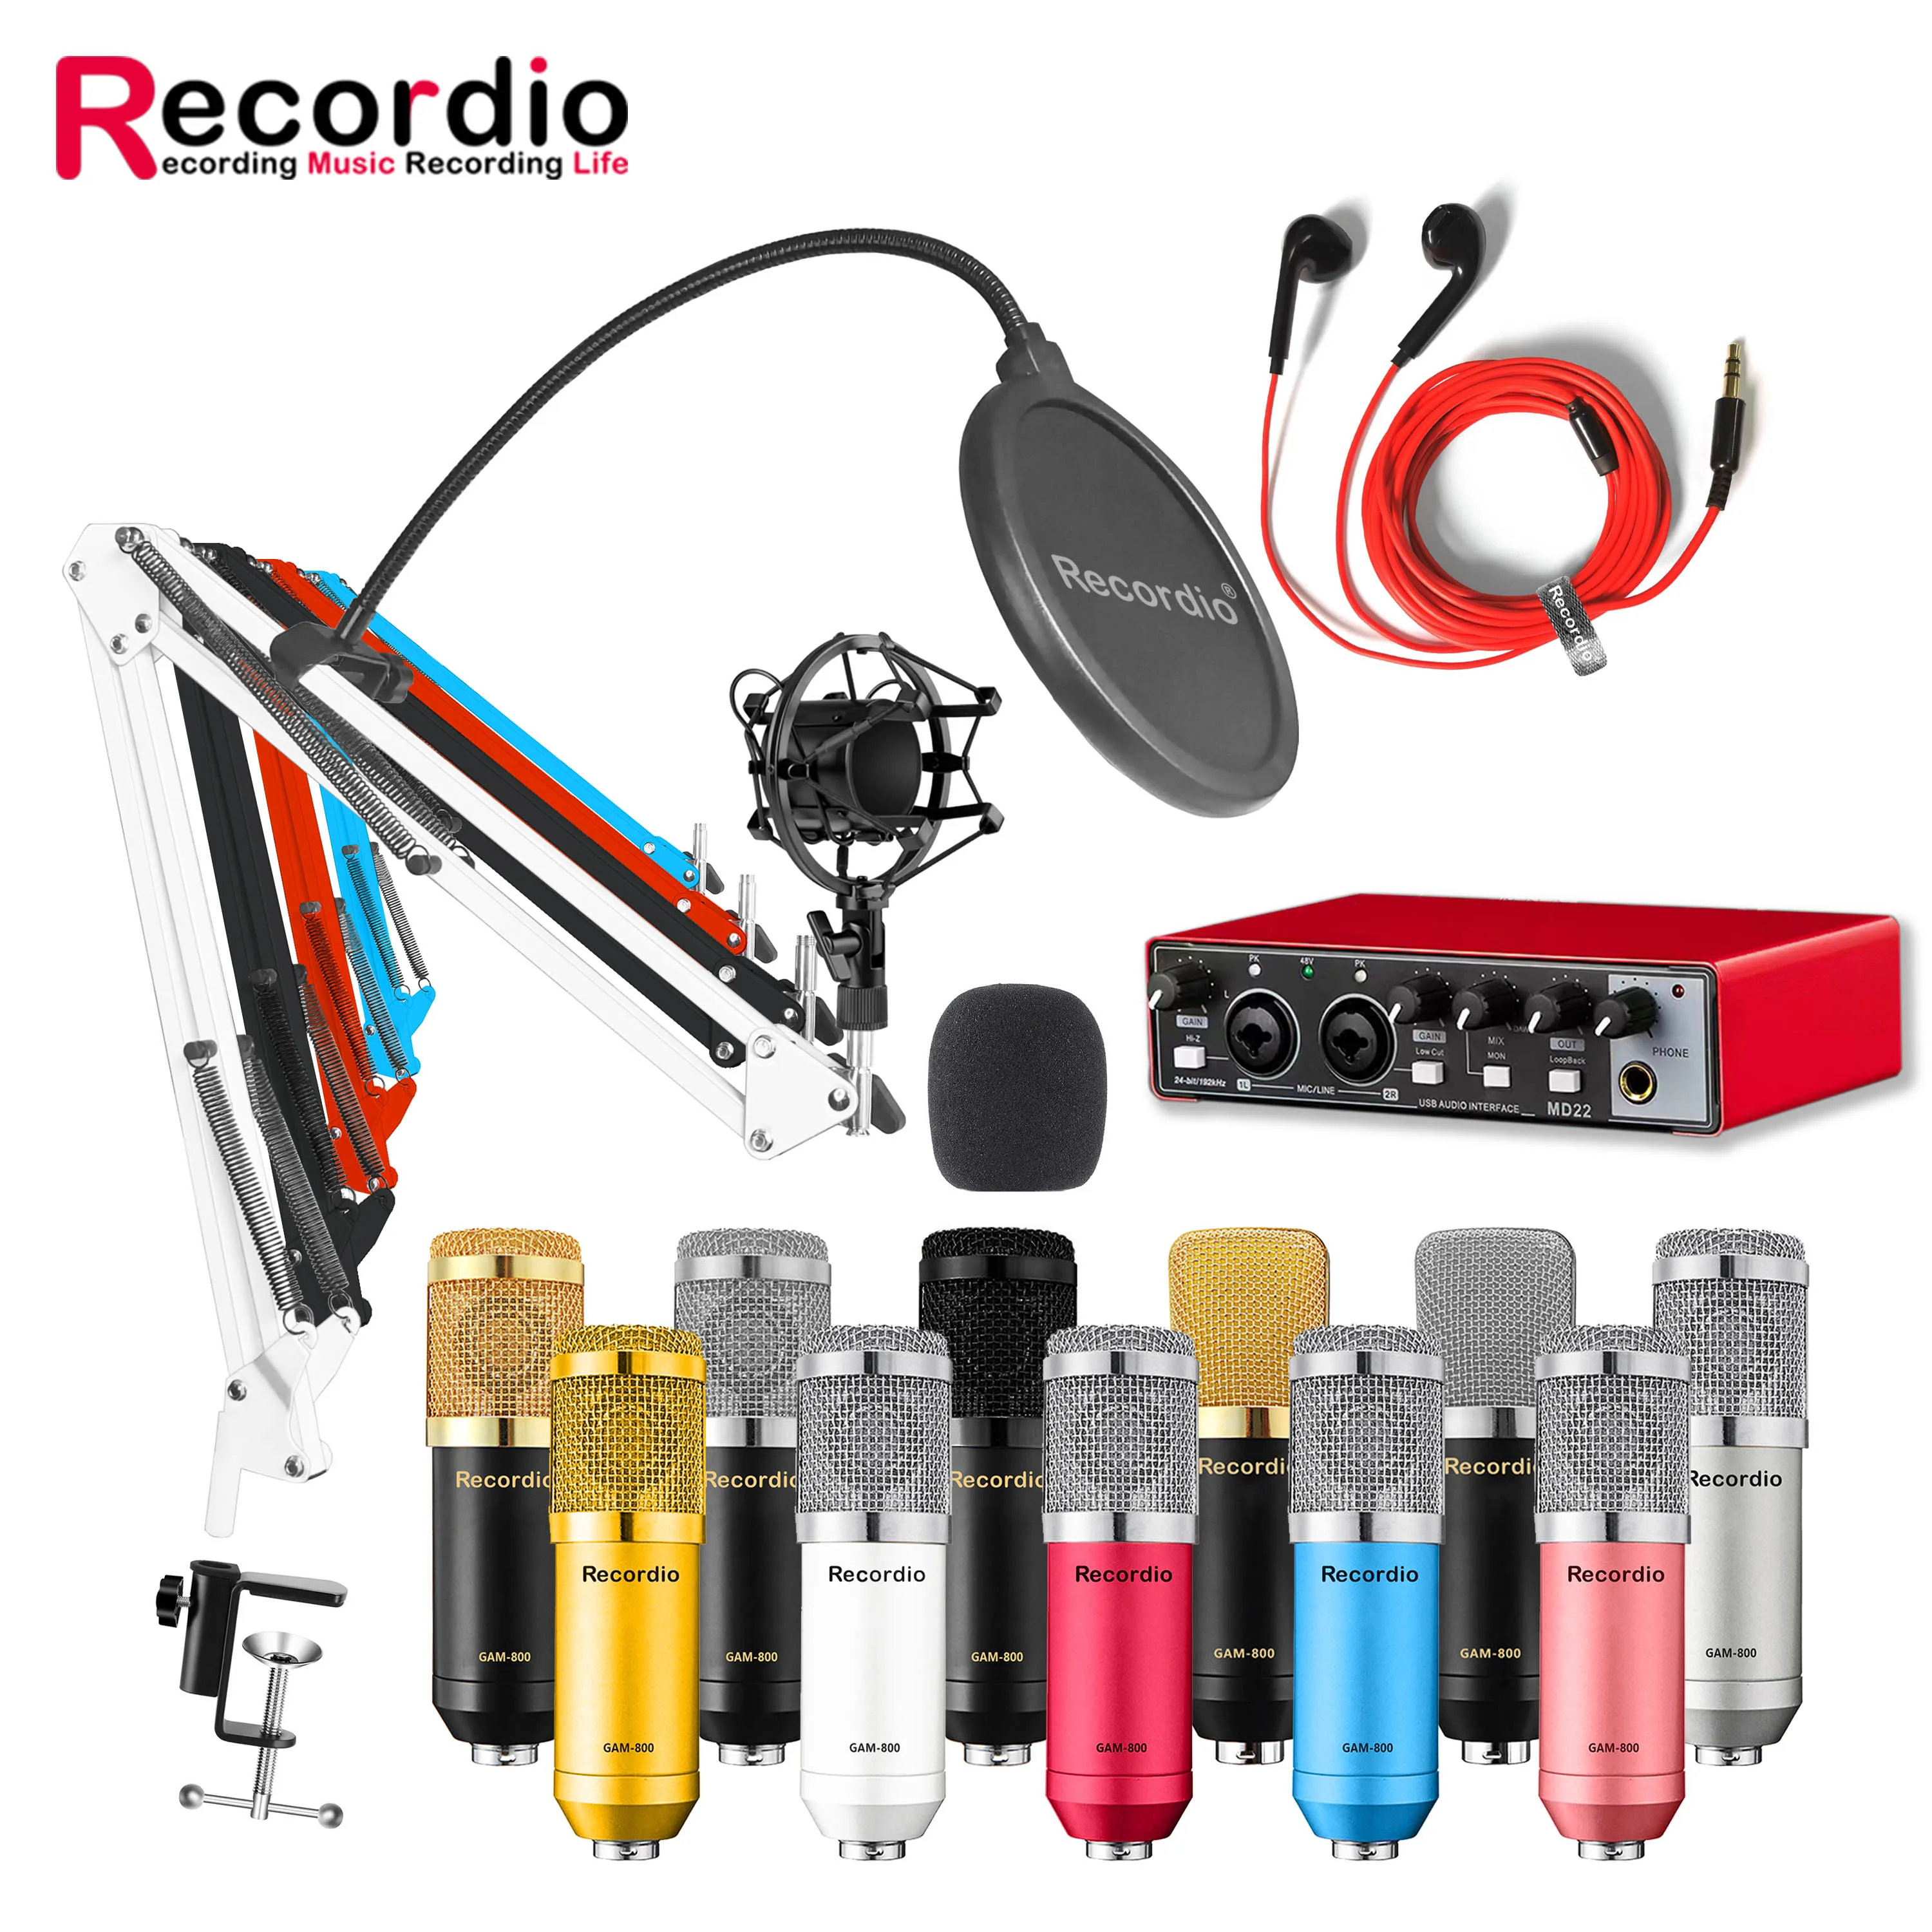 

GAM-800AI Professional Condenser Microphone MD22 Sound Card set for webcast live recording